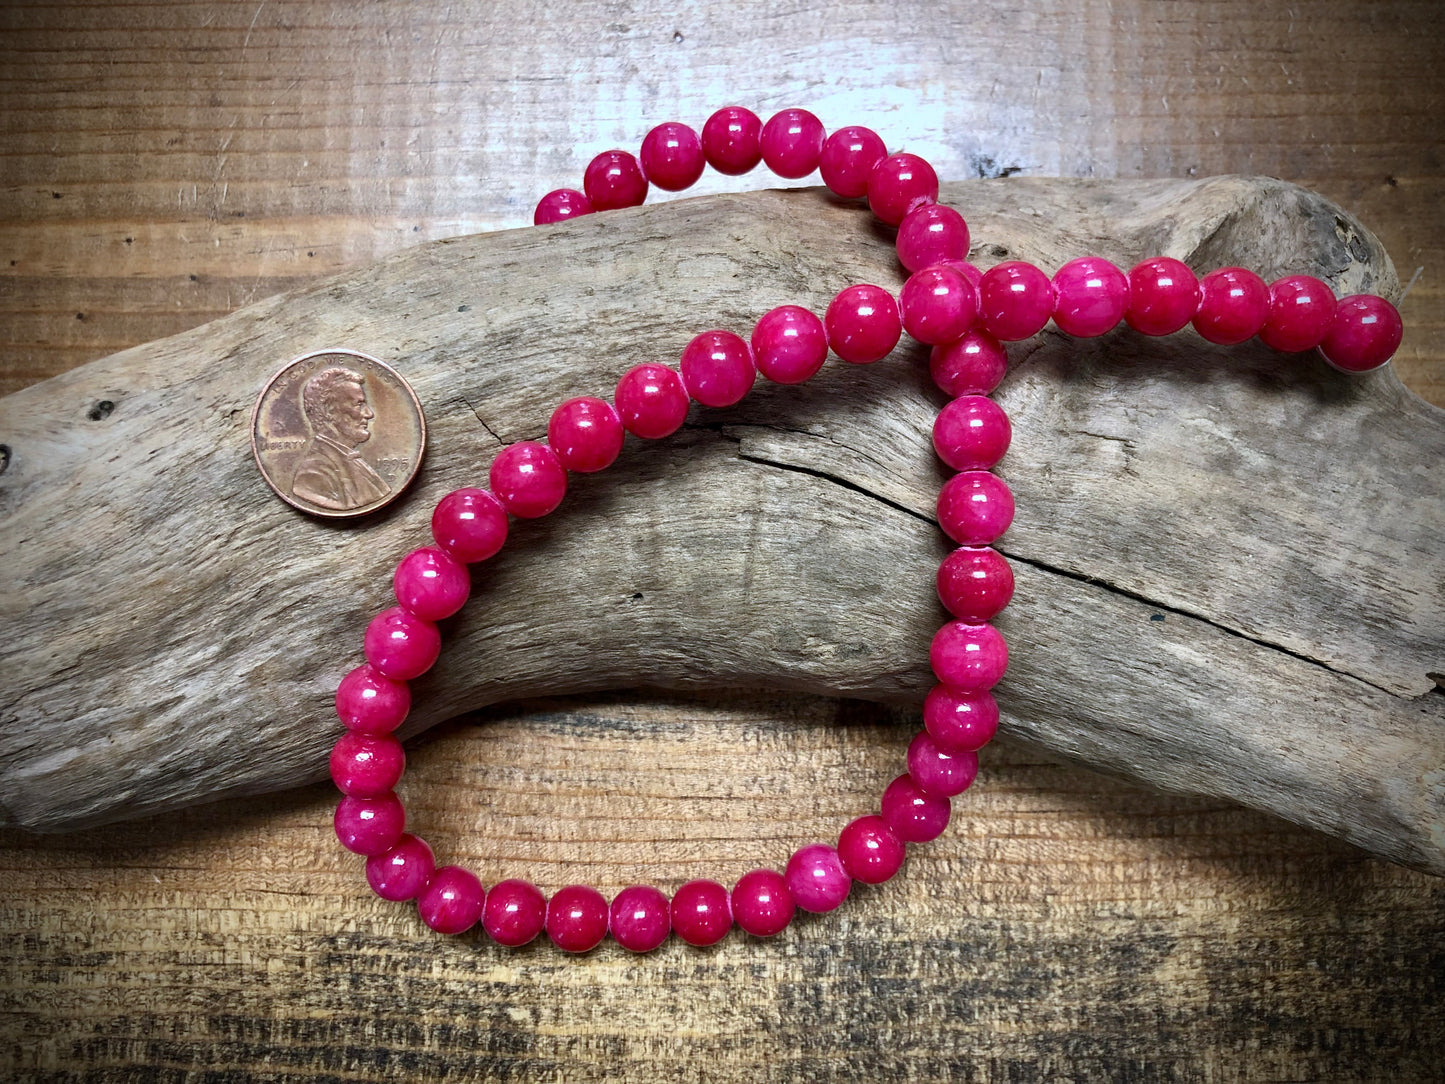 Dyed Jade Smooth Rounds - Hot Pink - 8mm - 15.5"